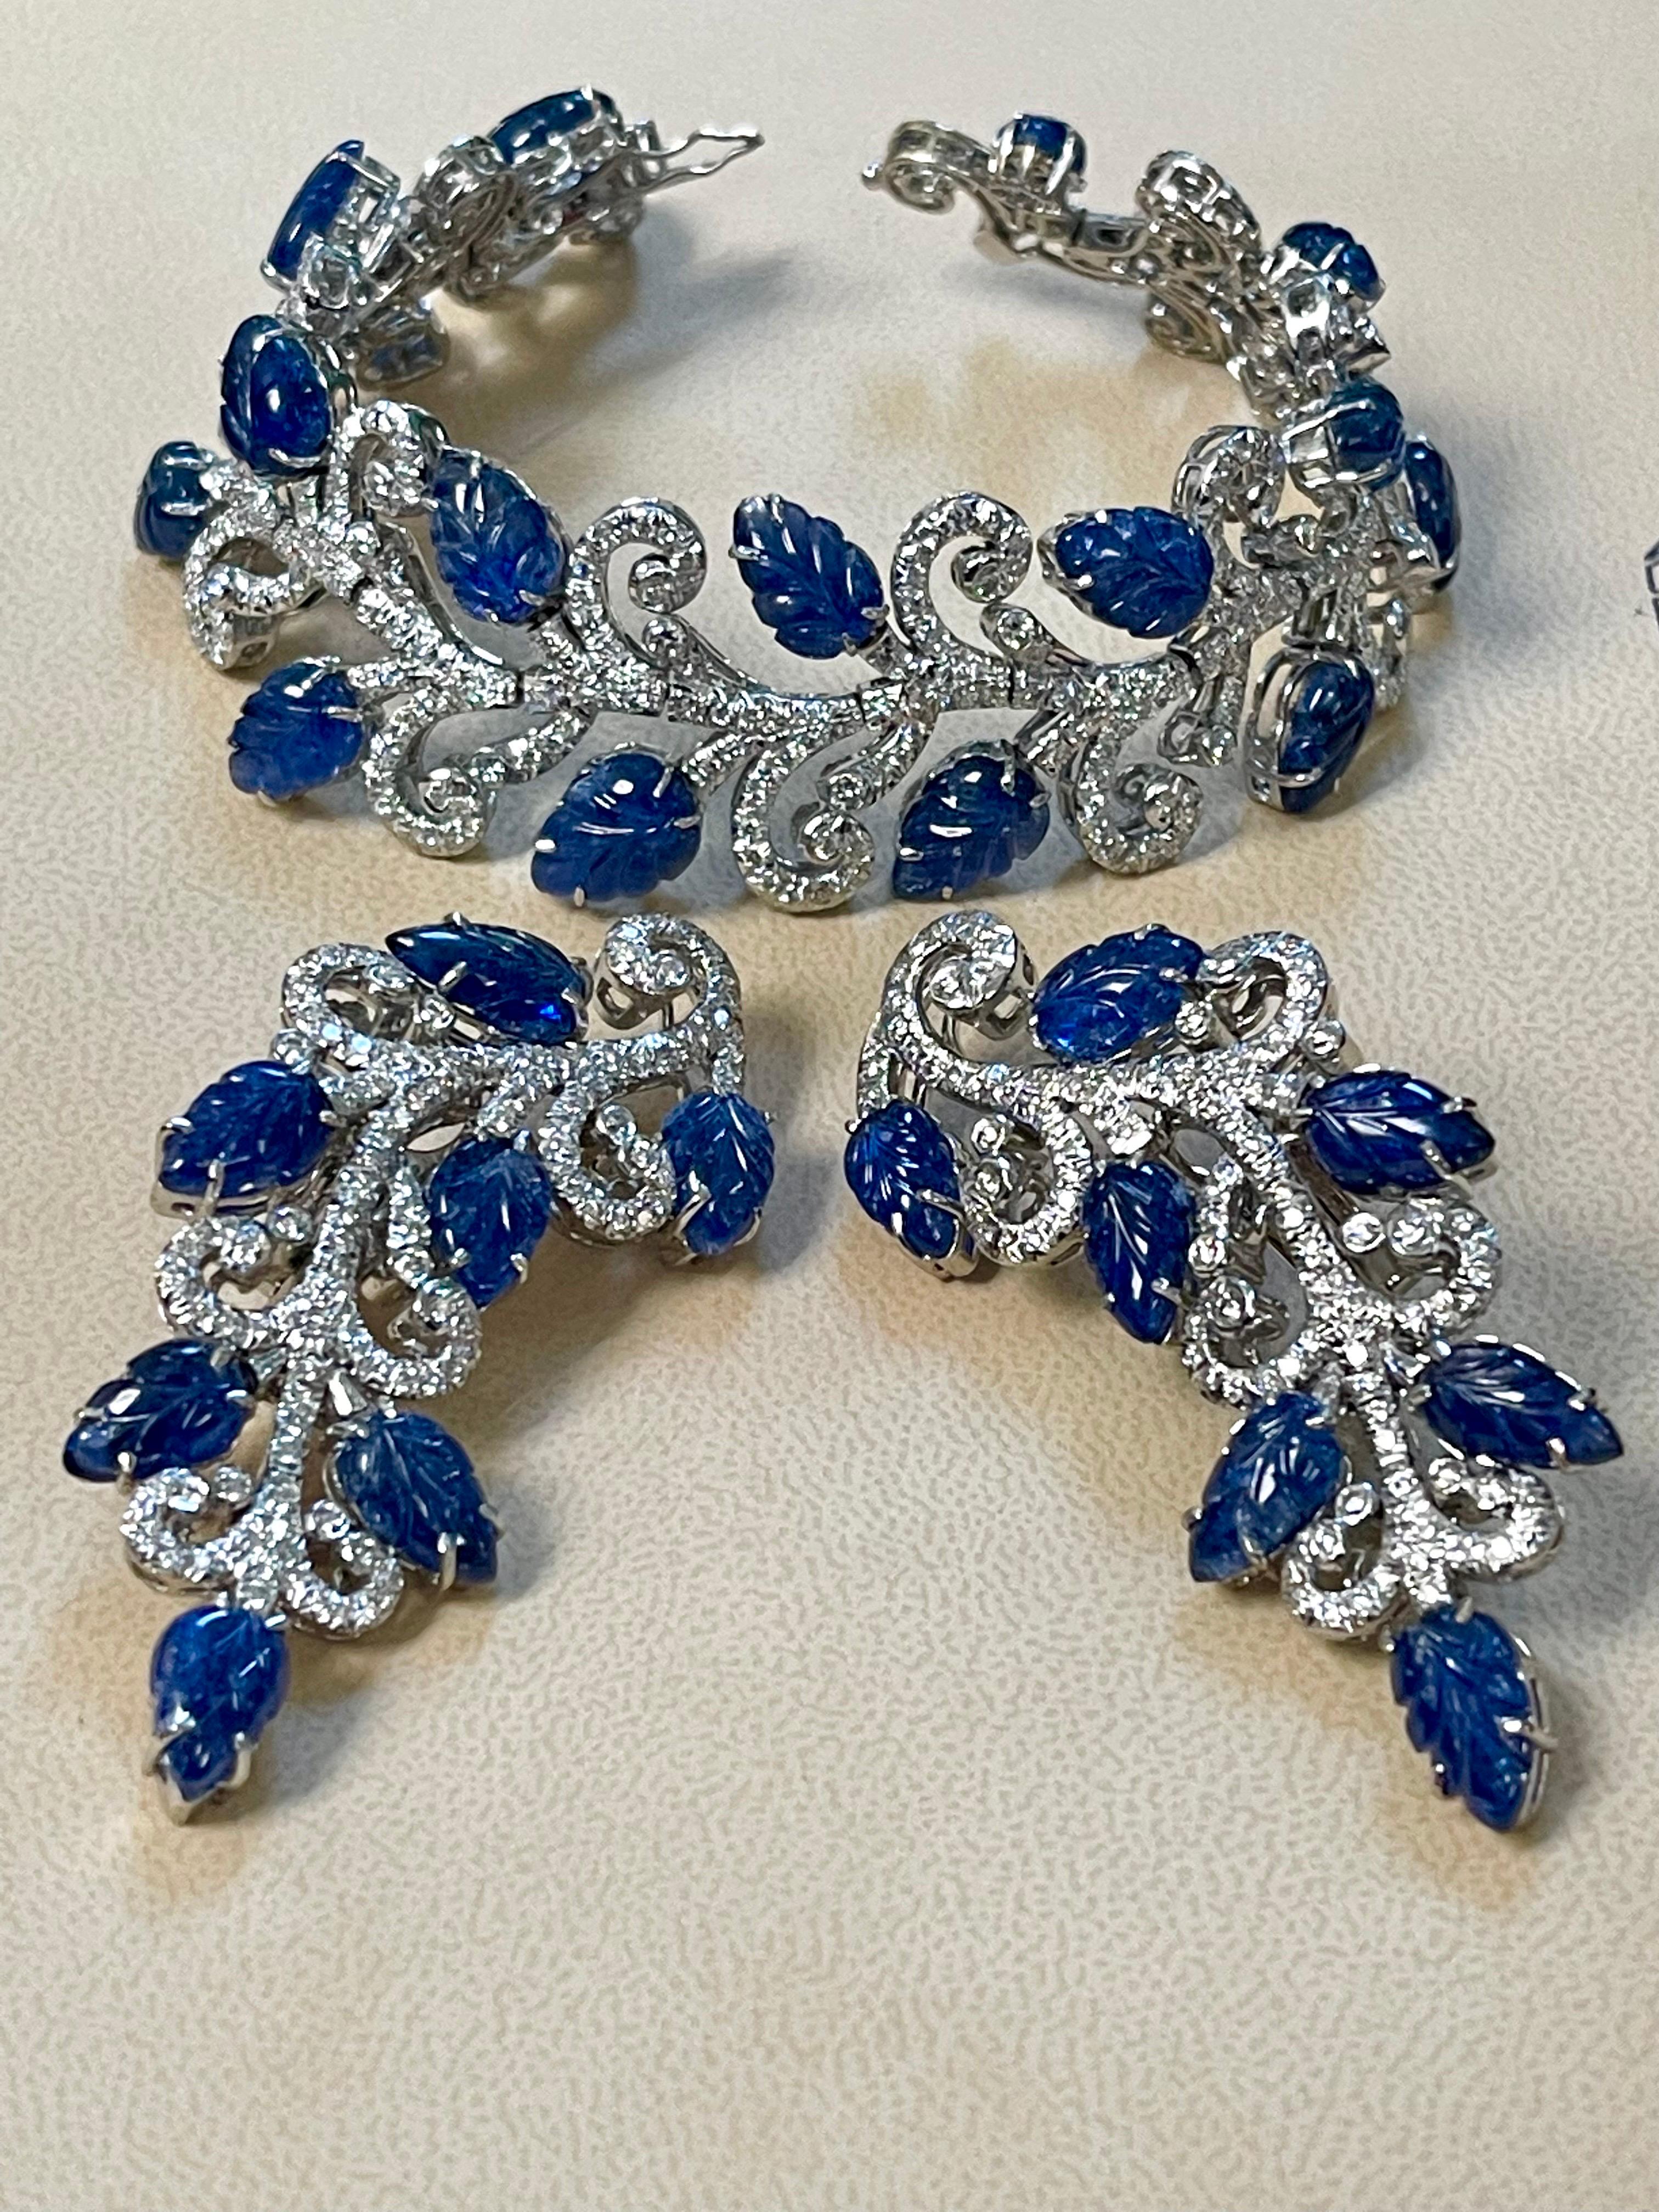 330 Ct Natural Carved Blue Sapphire & 65 Ct Diamond Necklace Bracelet & Earring For Sale 4